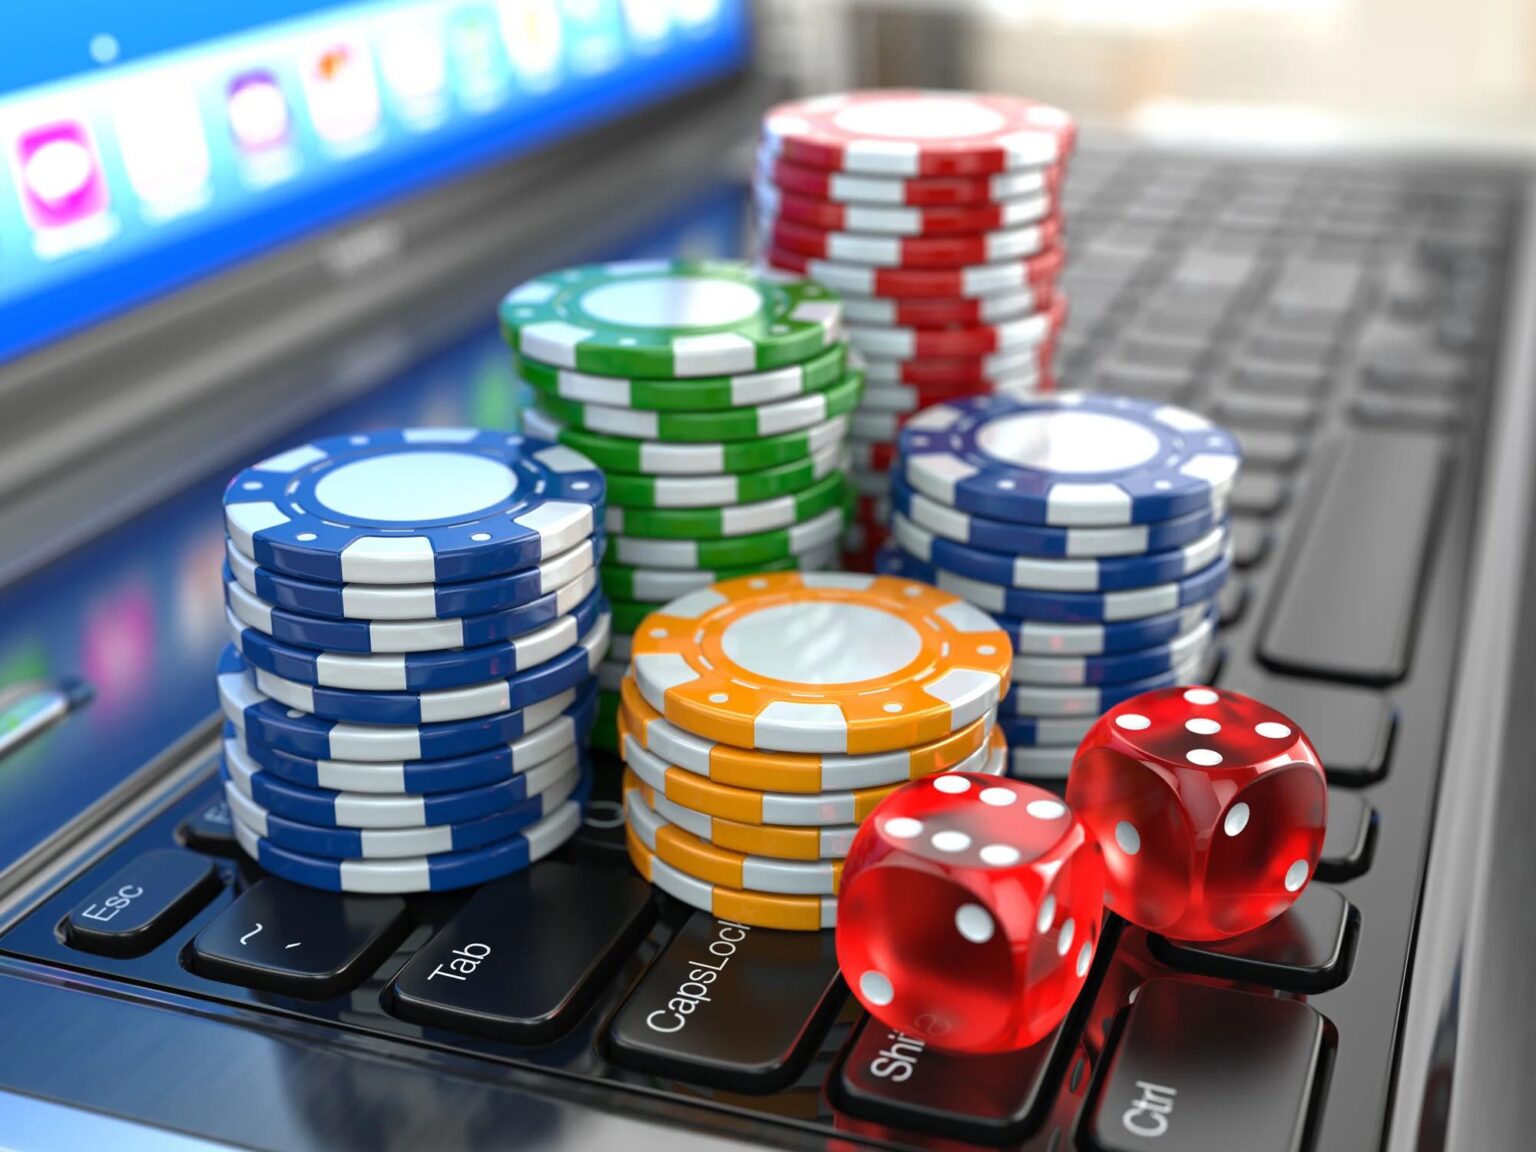 The key to winning big in an online casino is having a solid strategy when you approach the games. Make the most of your next game with these tips.